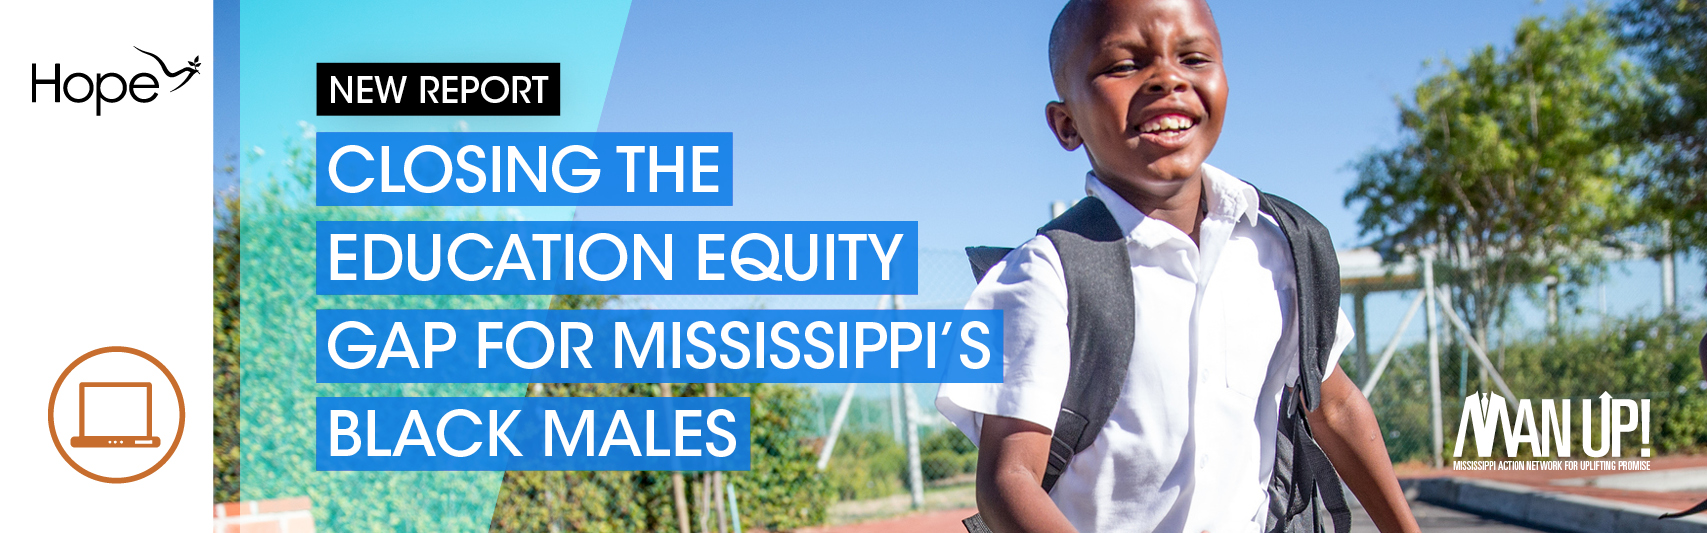 Slider_Closing the Education Equity Gap for Mississippi’s Black Males